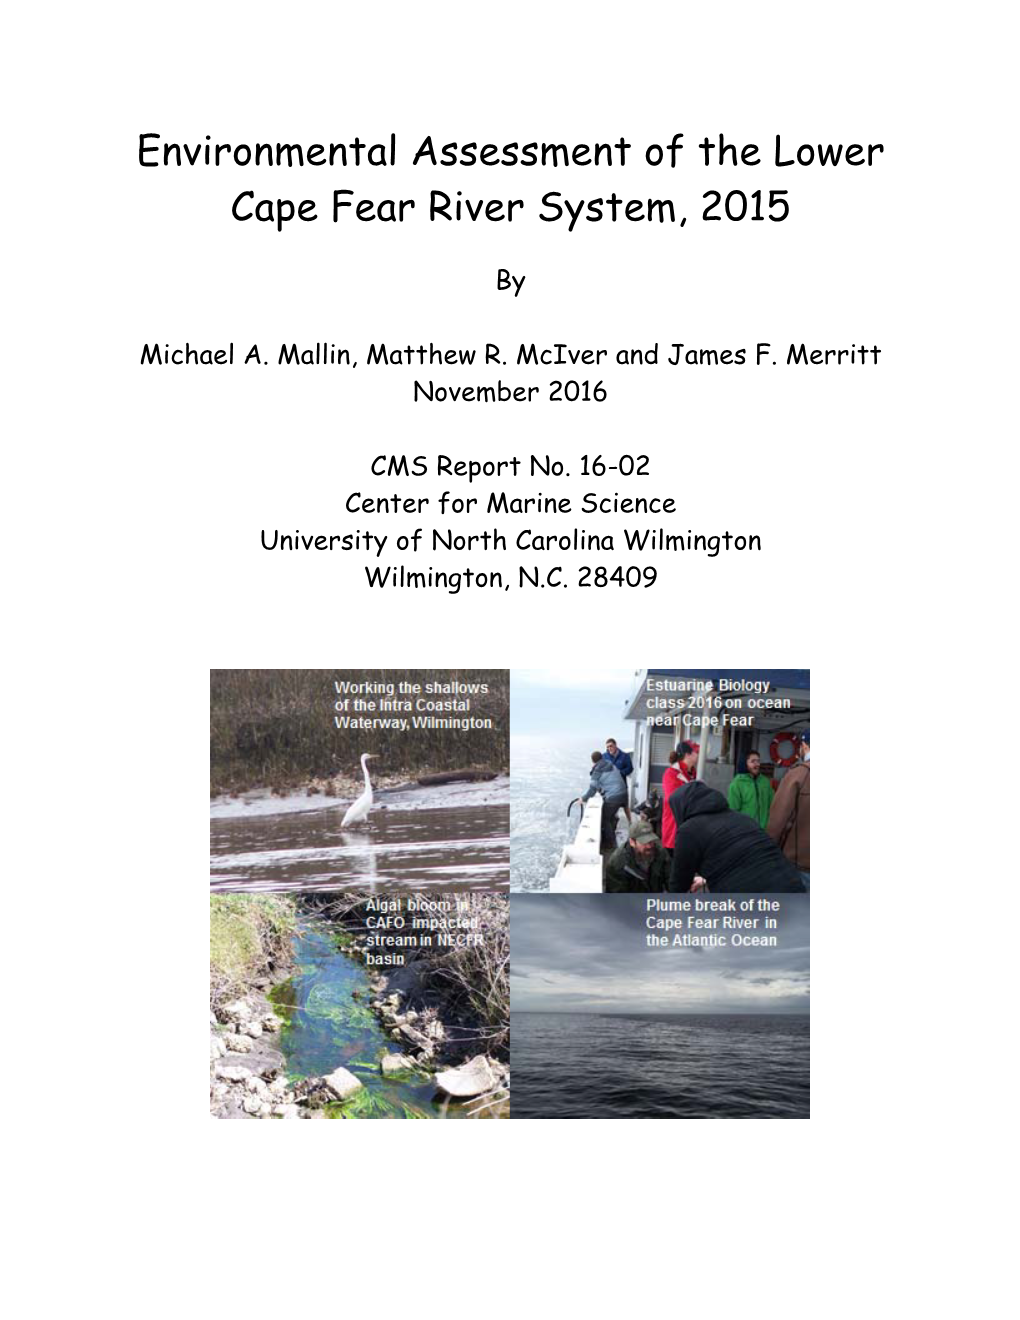 Environmental Assessment of the Lower Cape Fear River System, 2015